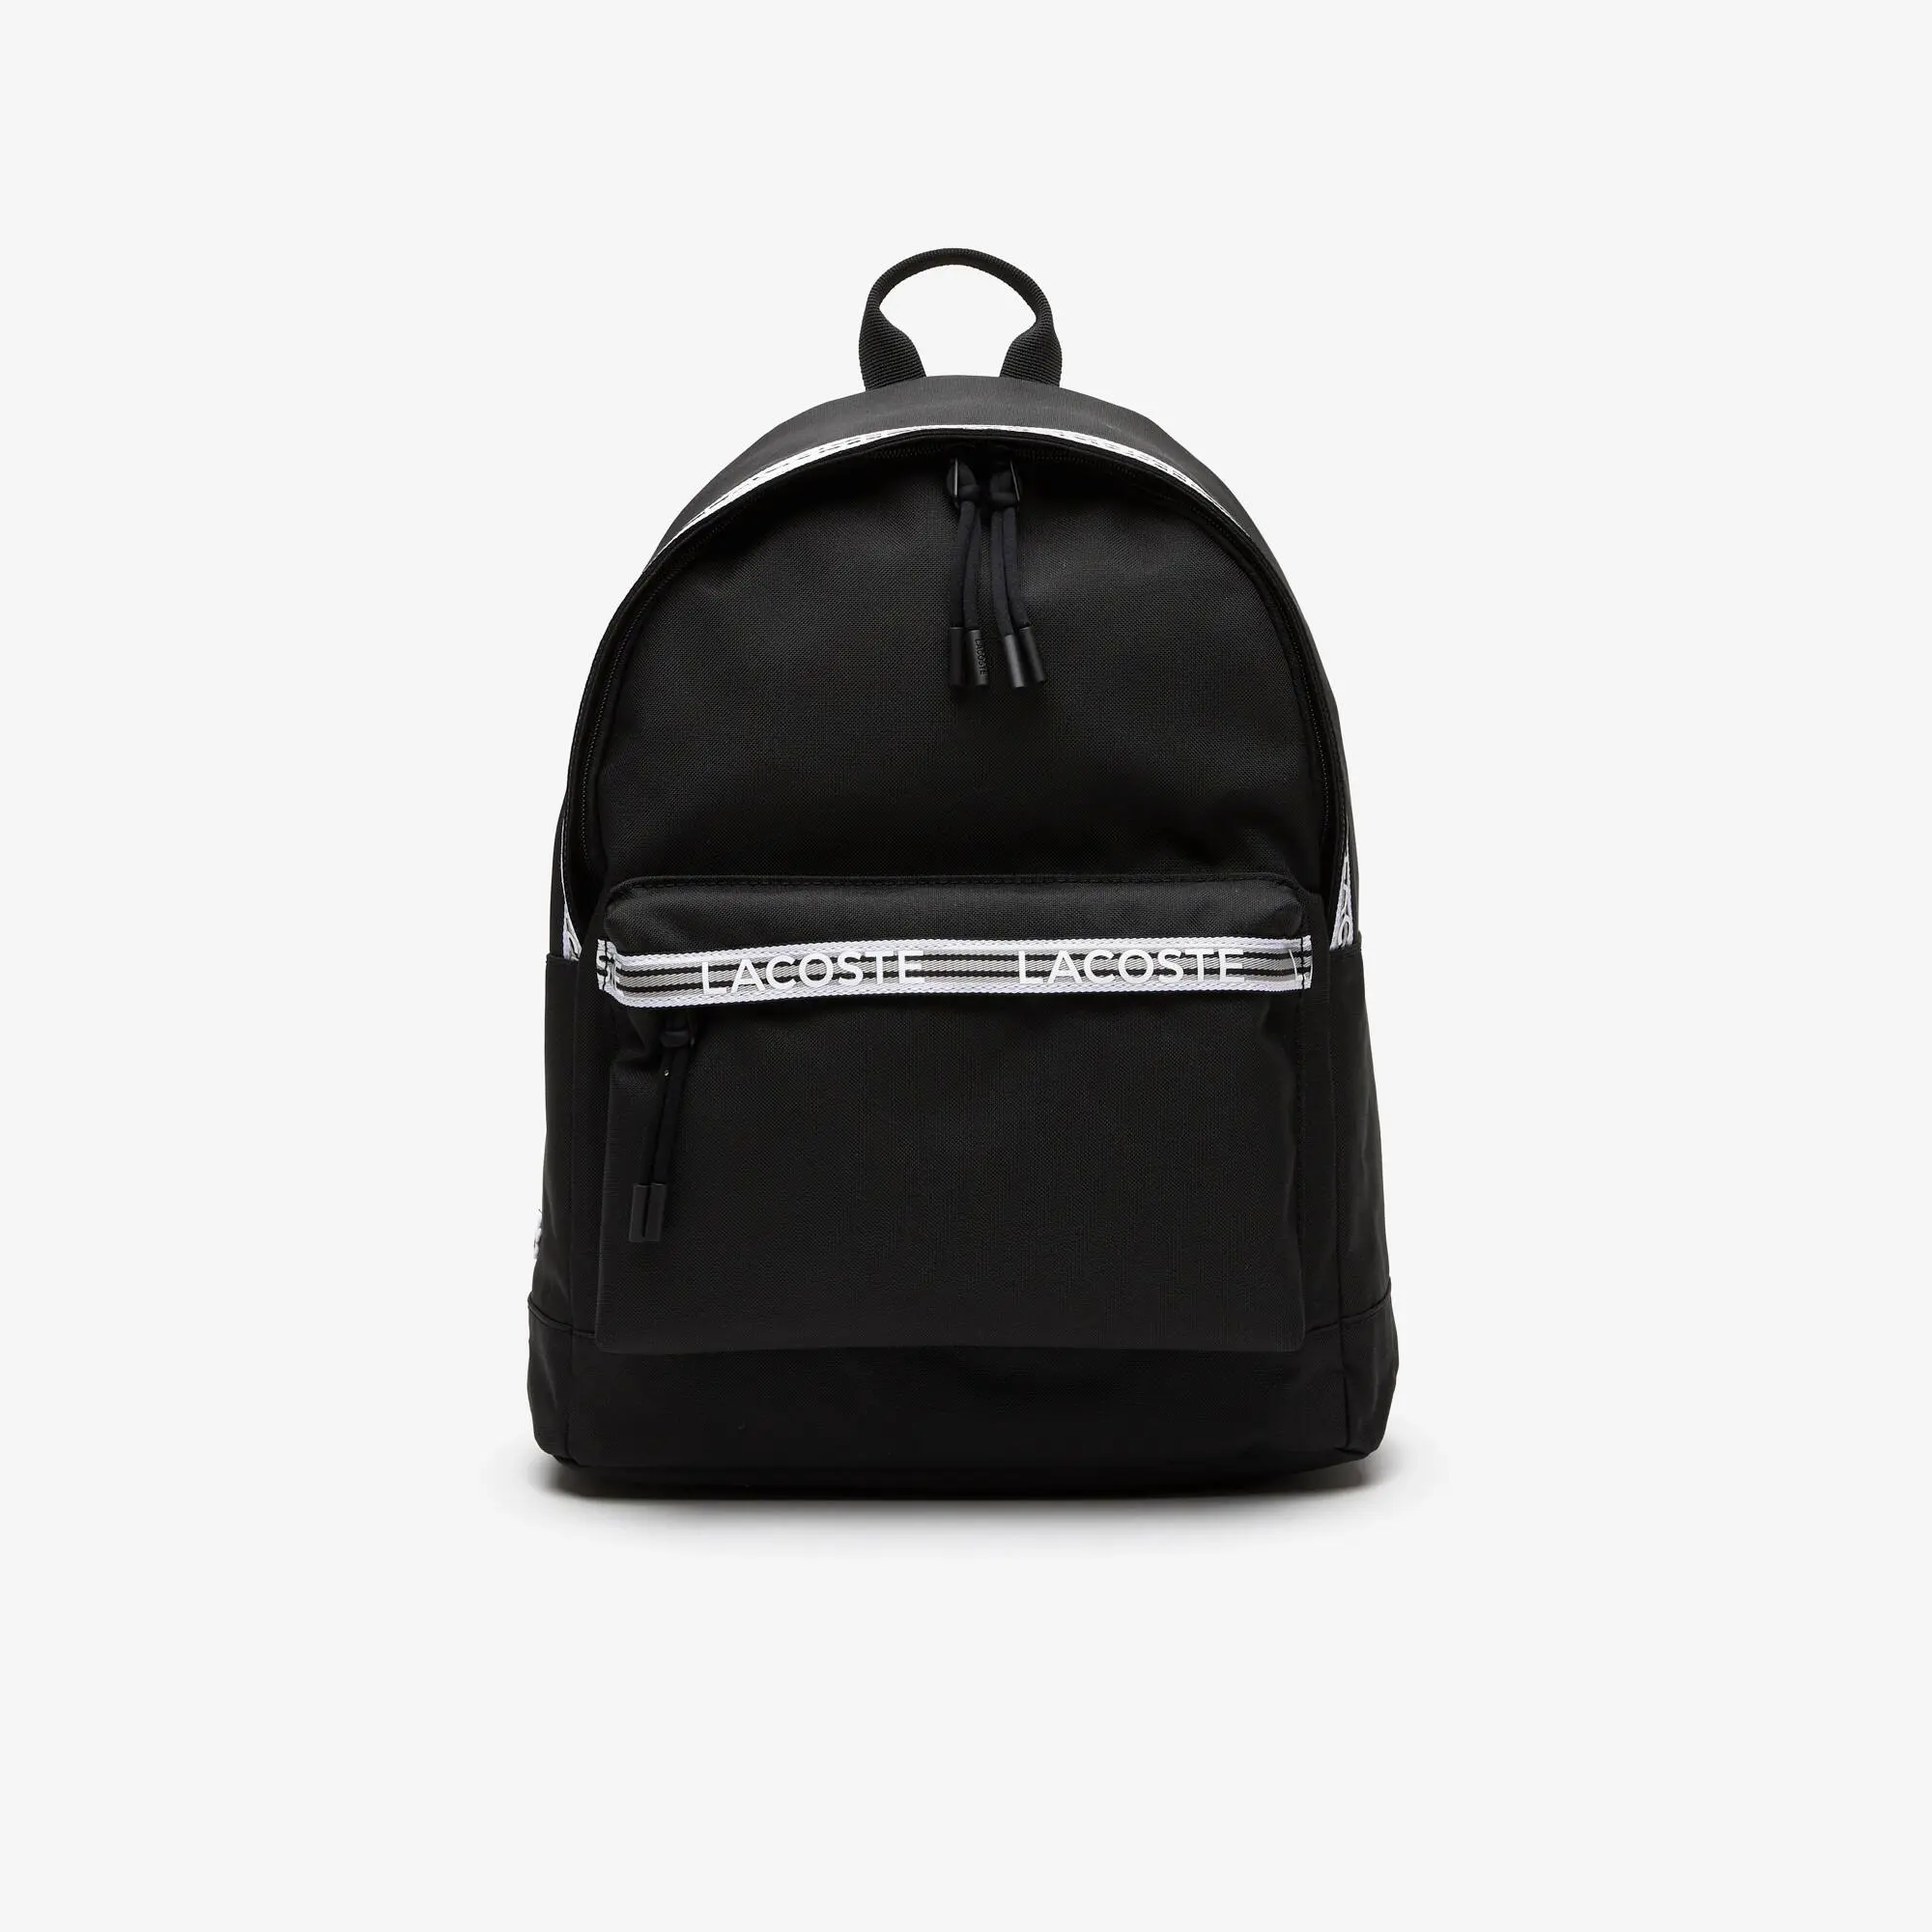 Lacoste Men’s Lacoste Neocroc Backpack with Zipped Logo Straps. 2